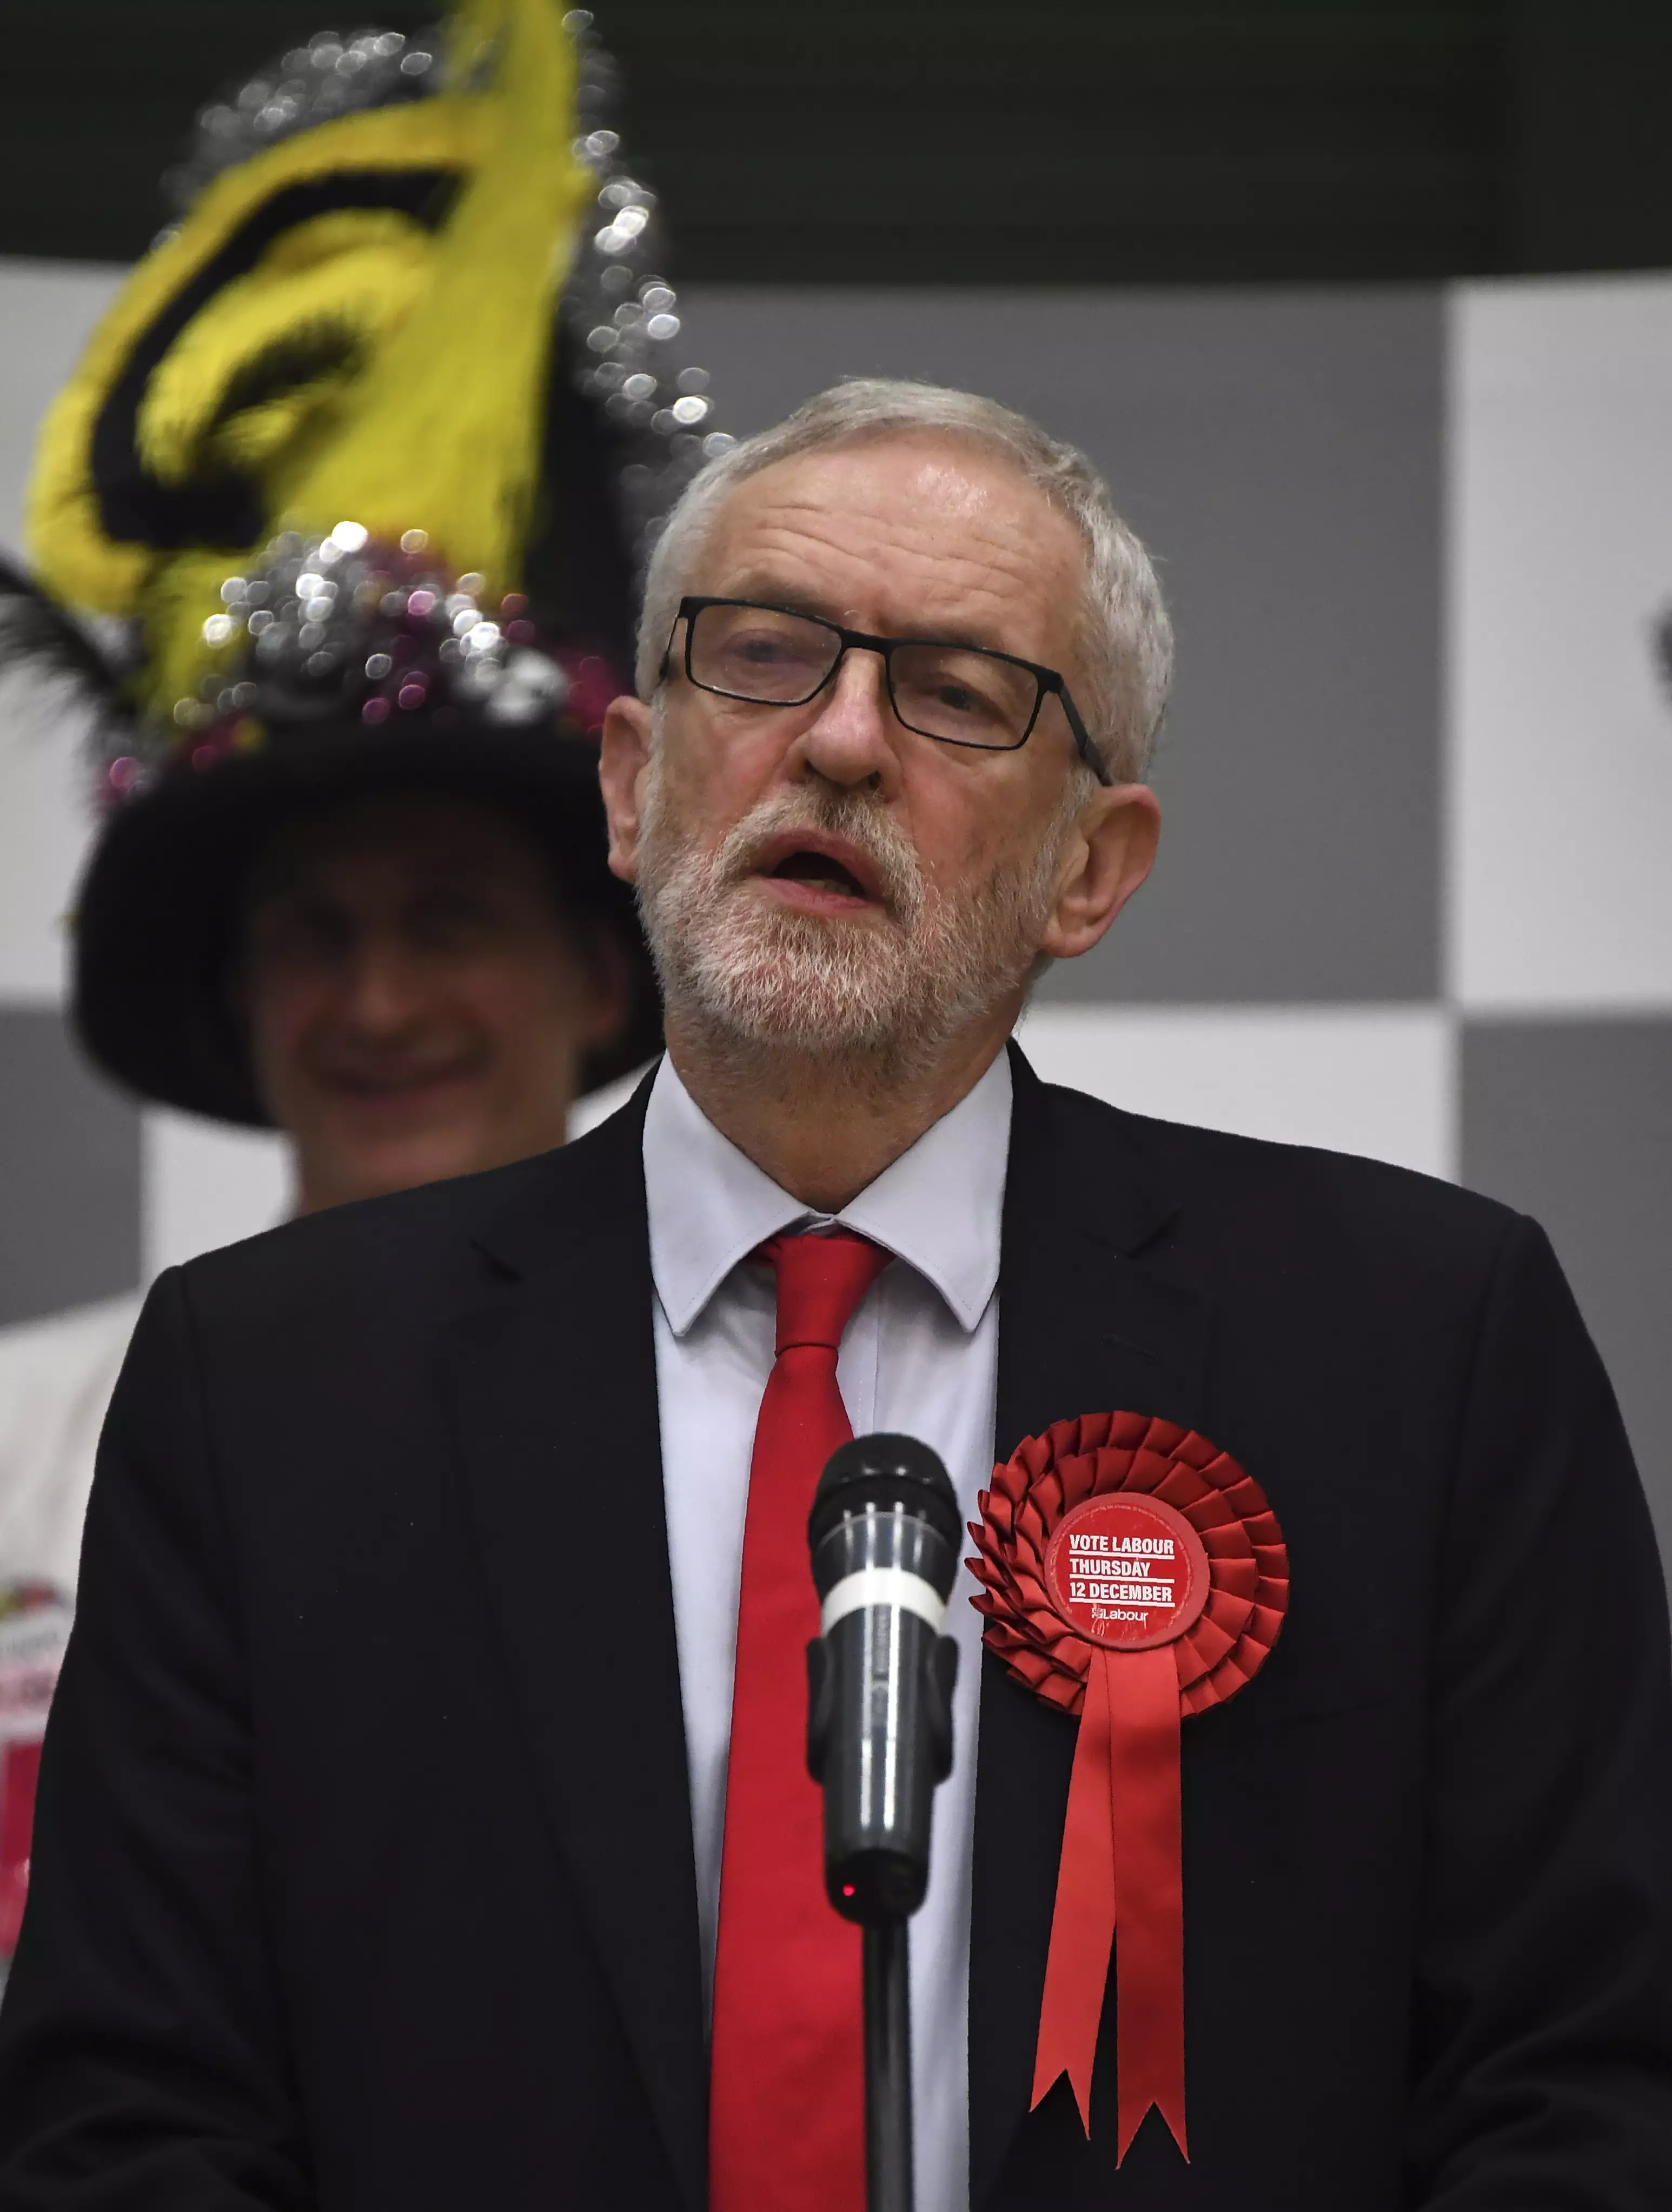 Jeremy Corbyn has also confirmed that he will not lead the Labour Party into the next election.